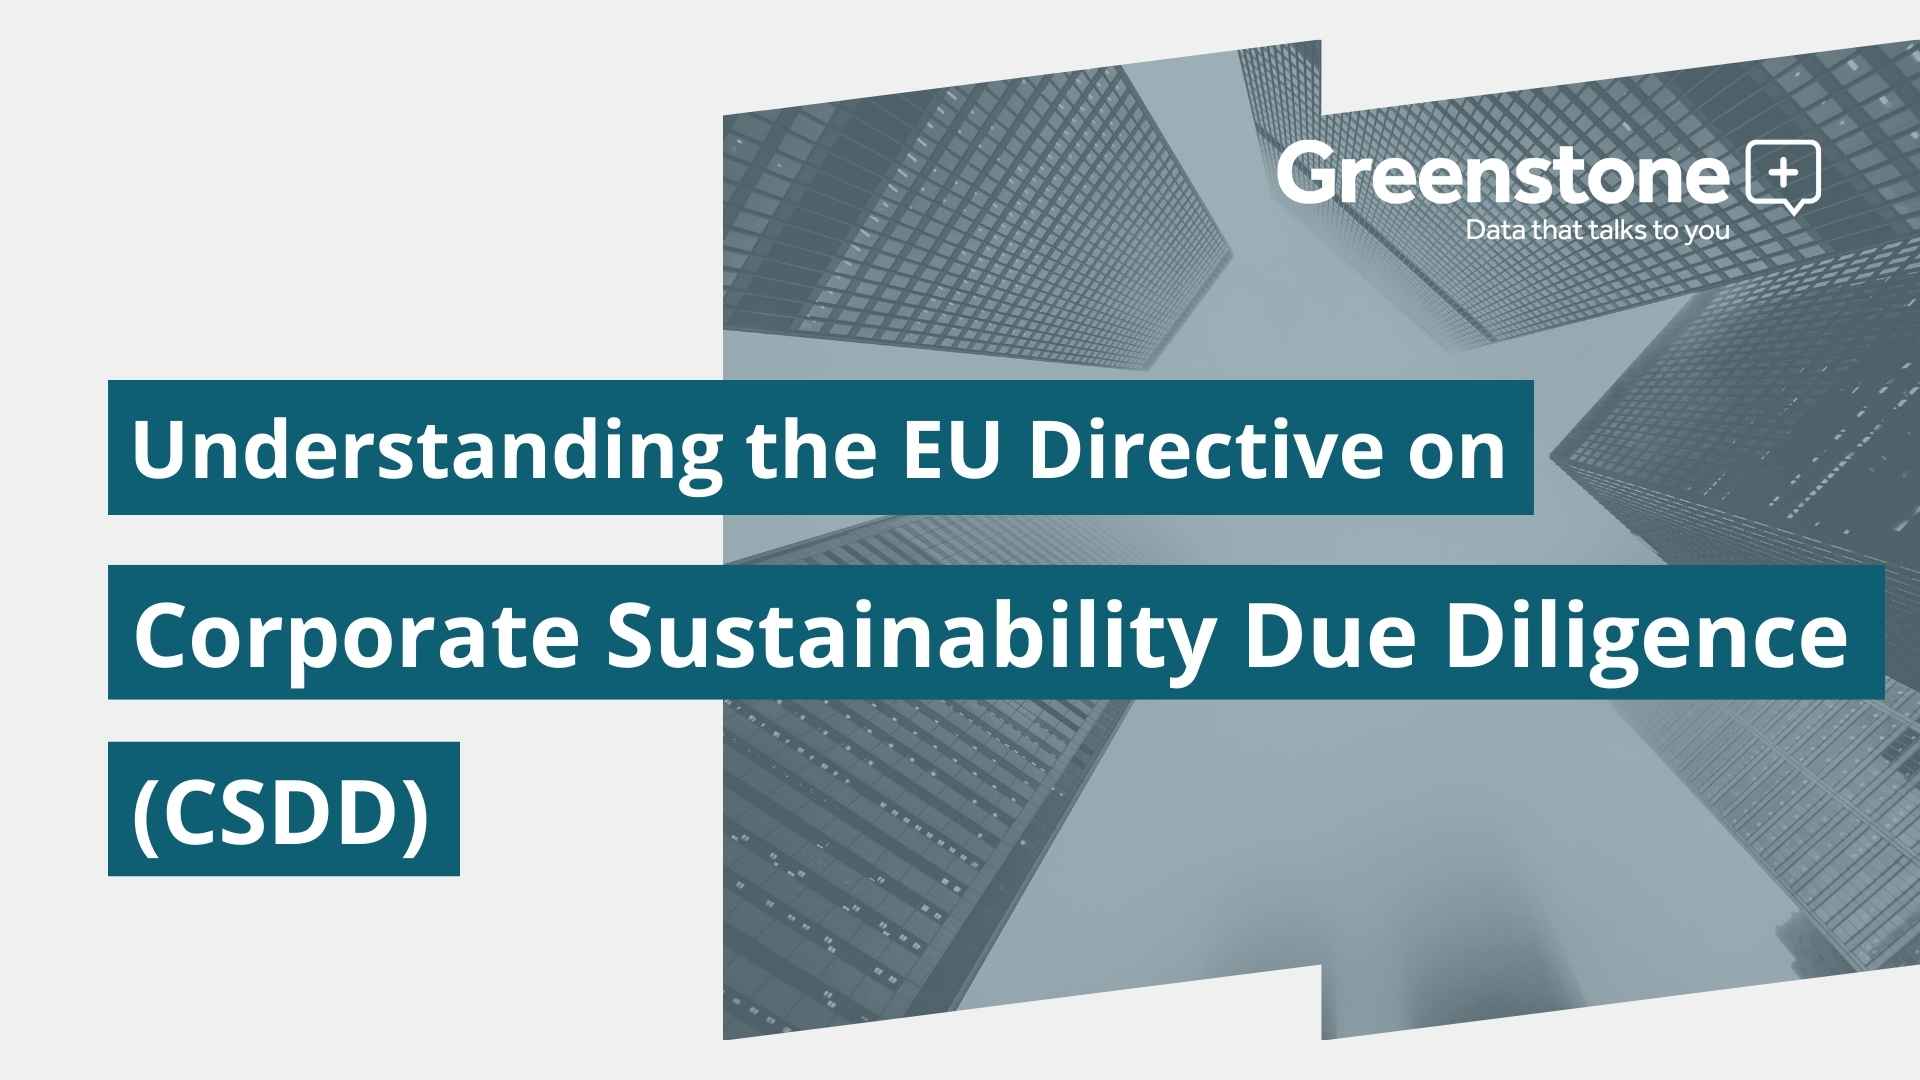 Understanding EU's Directive on Corporate Sustainability Due Diligence